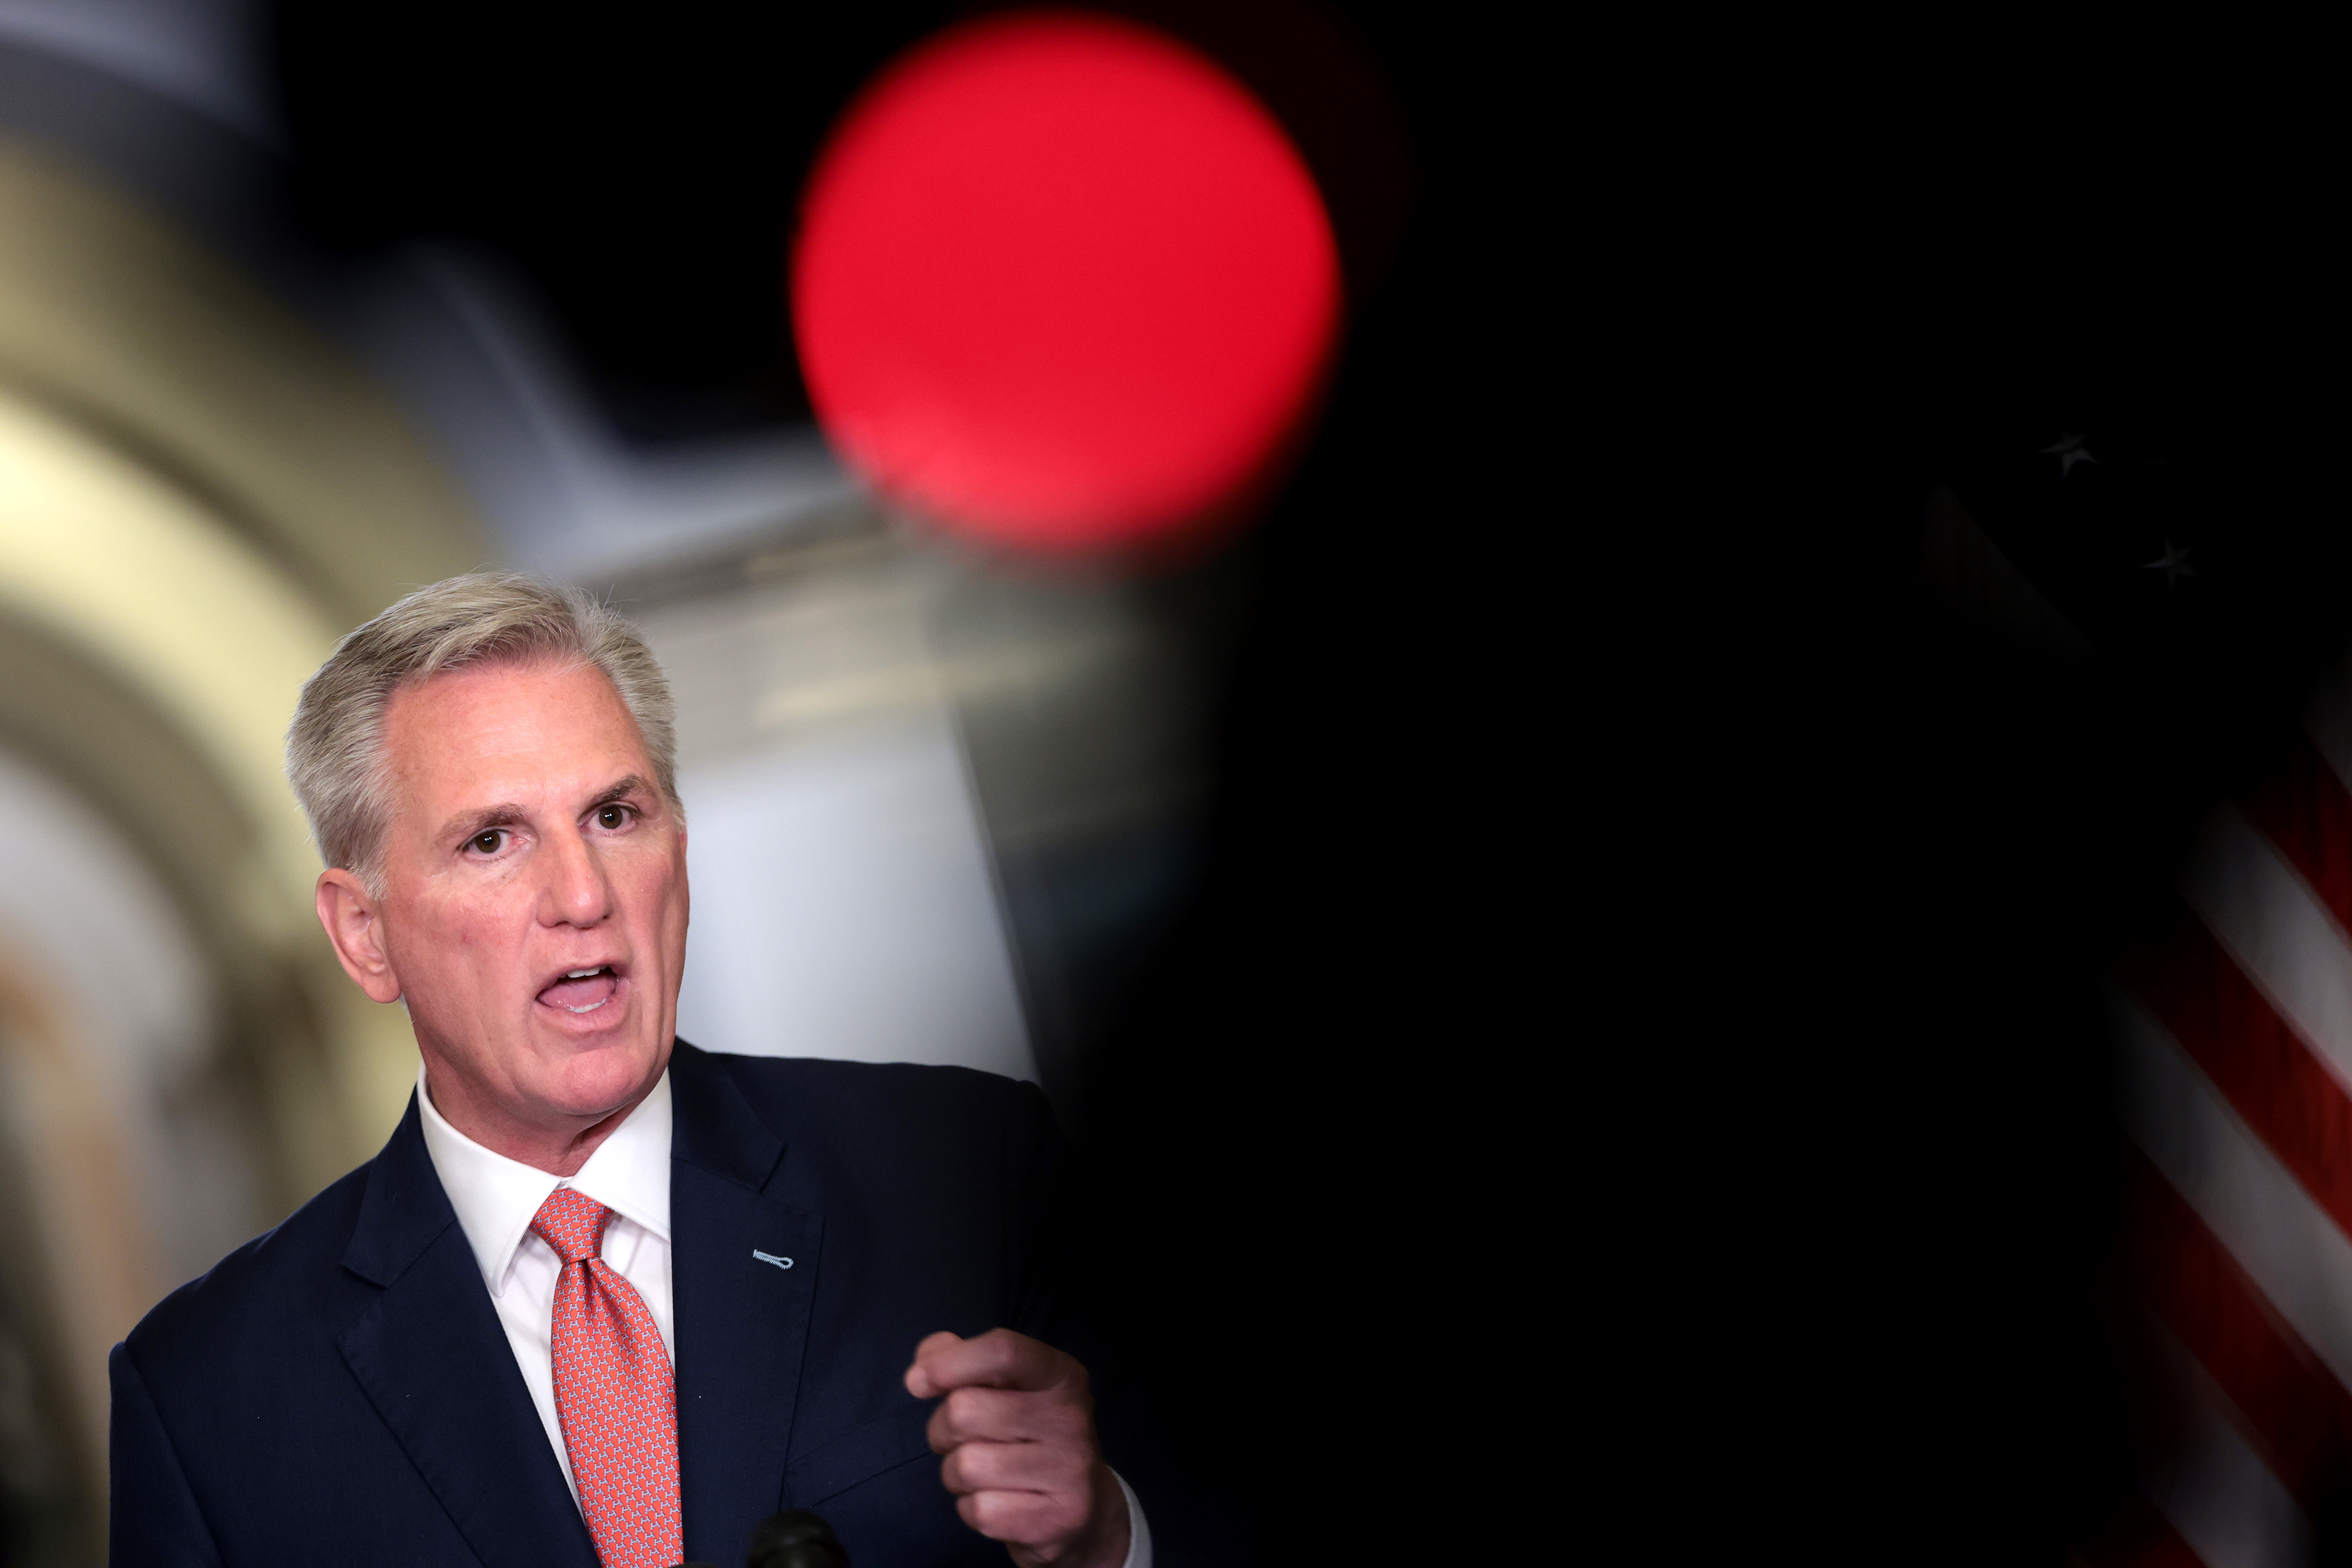 Kevin McCarthy speaking at the U.S. Capitol